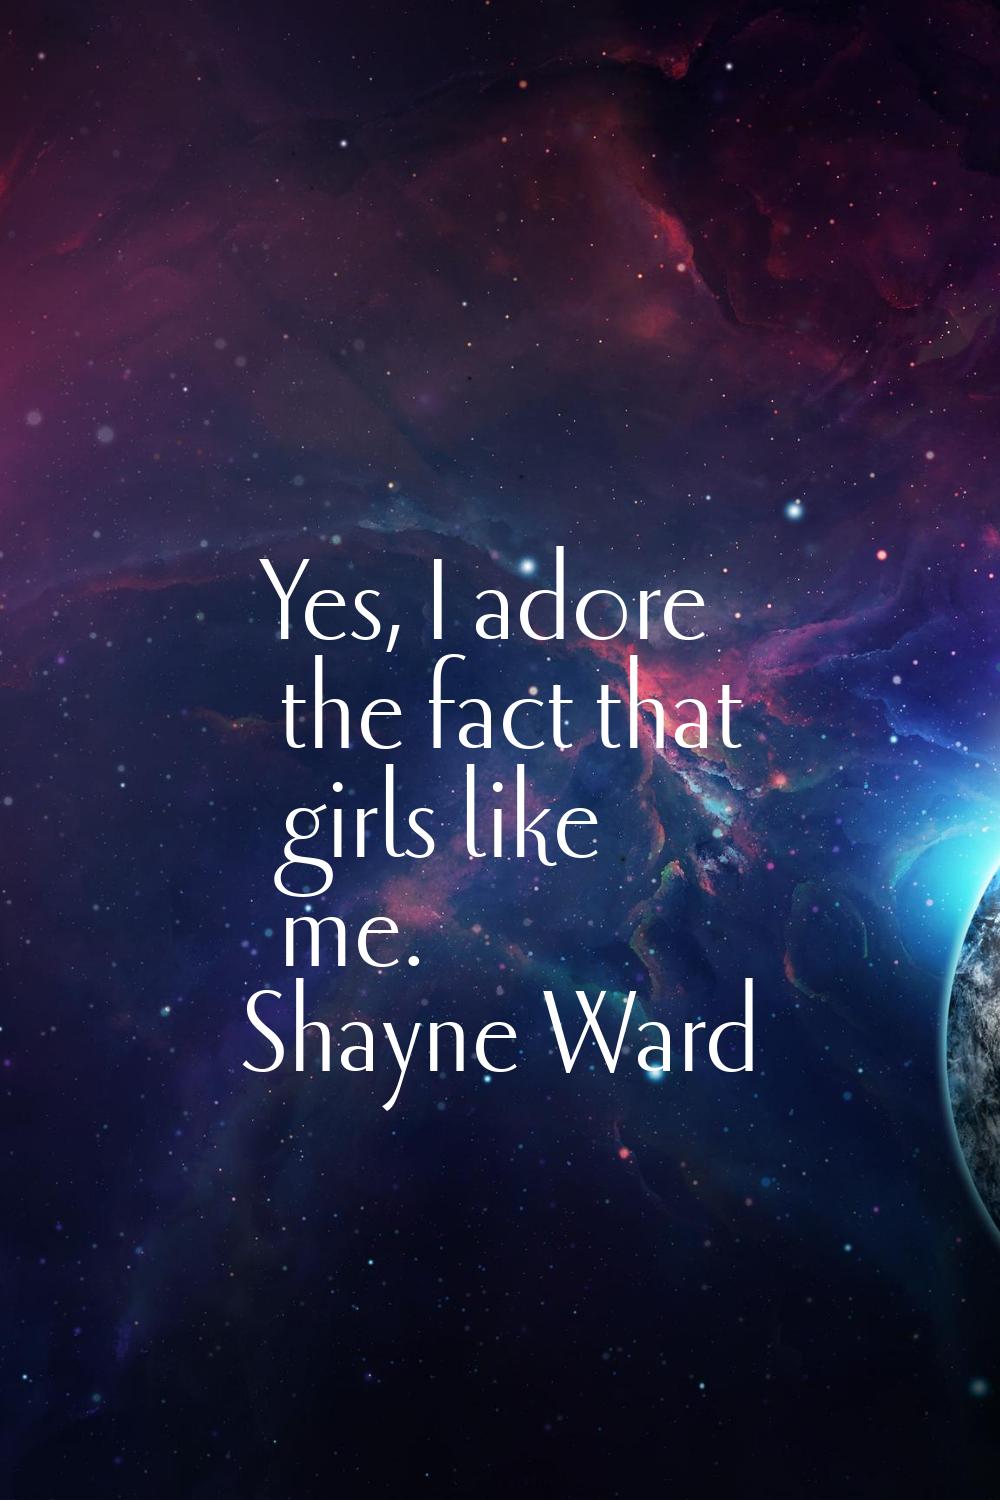 Yes, I adore the fact that girls like me.